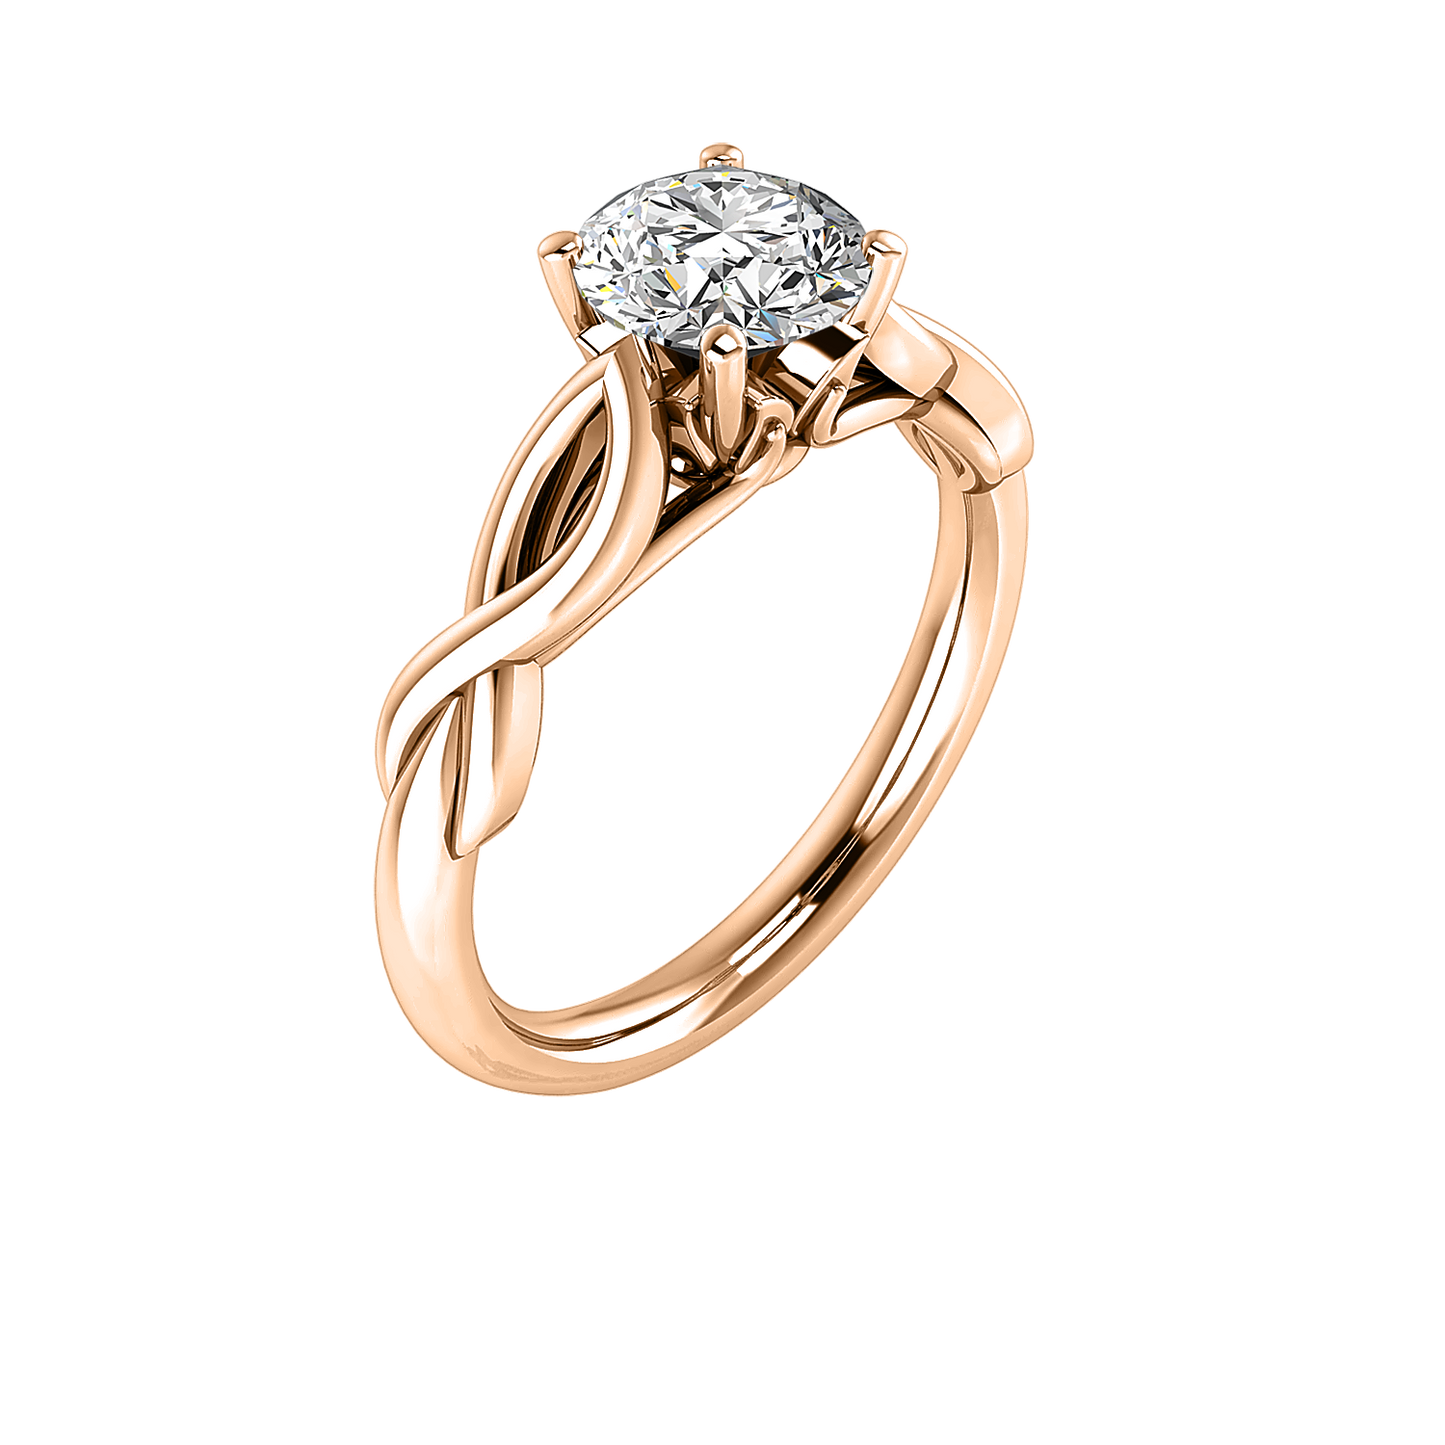 Mia Twisted Plain band 4 prong Solitaire - The Diamond Club